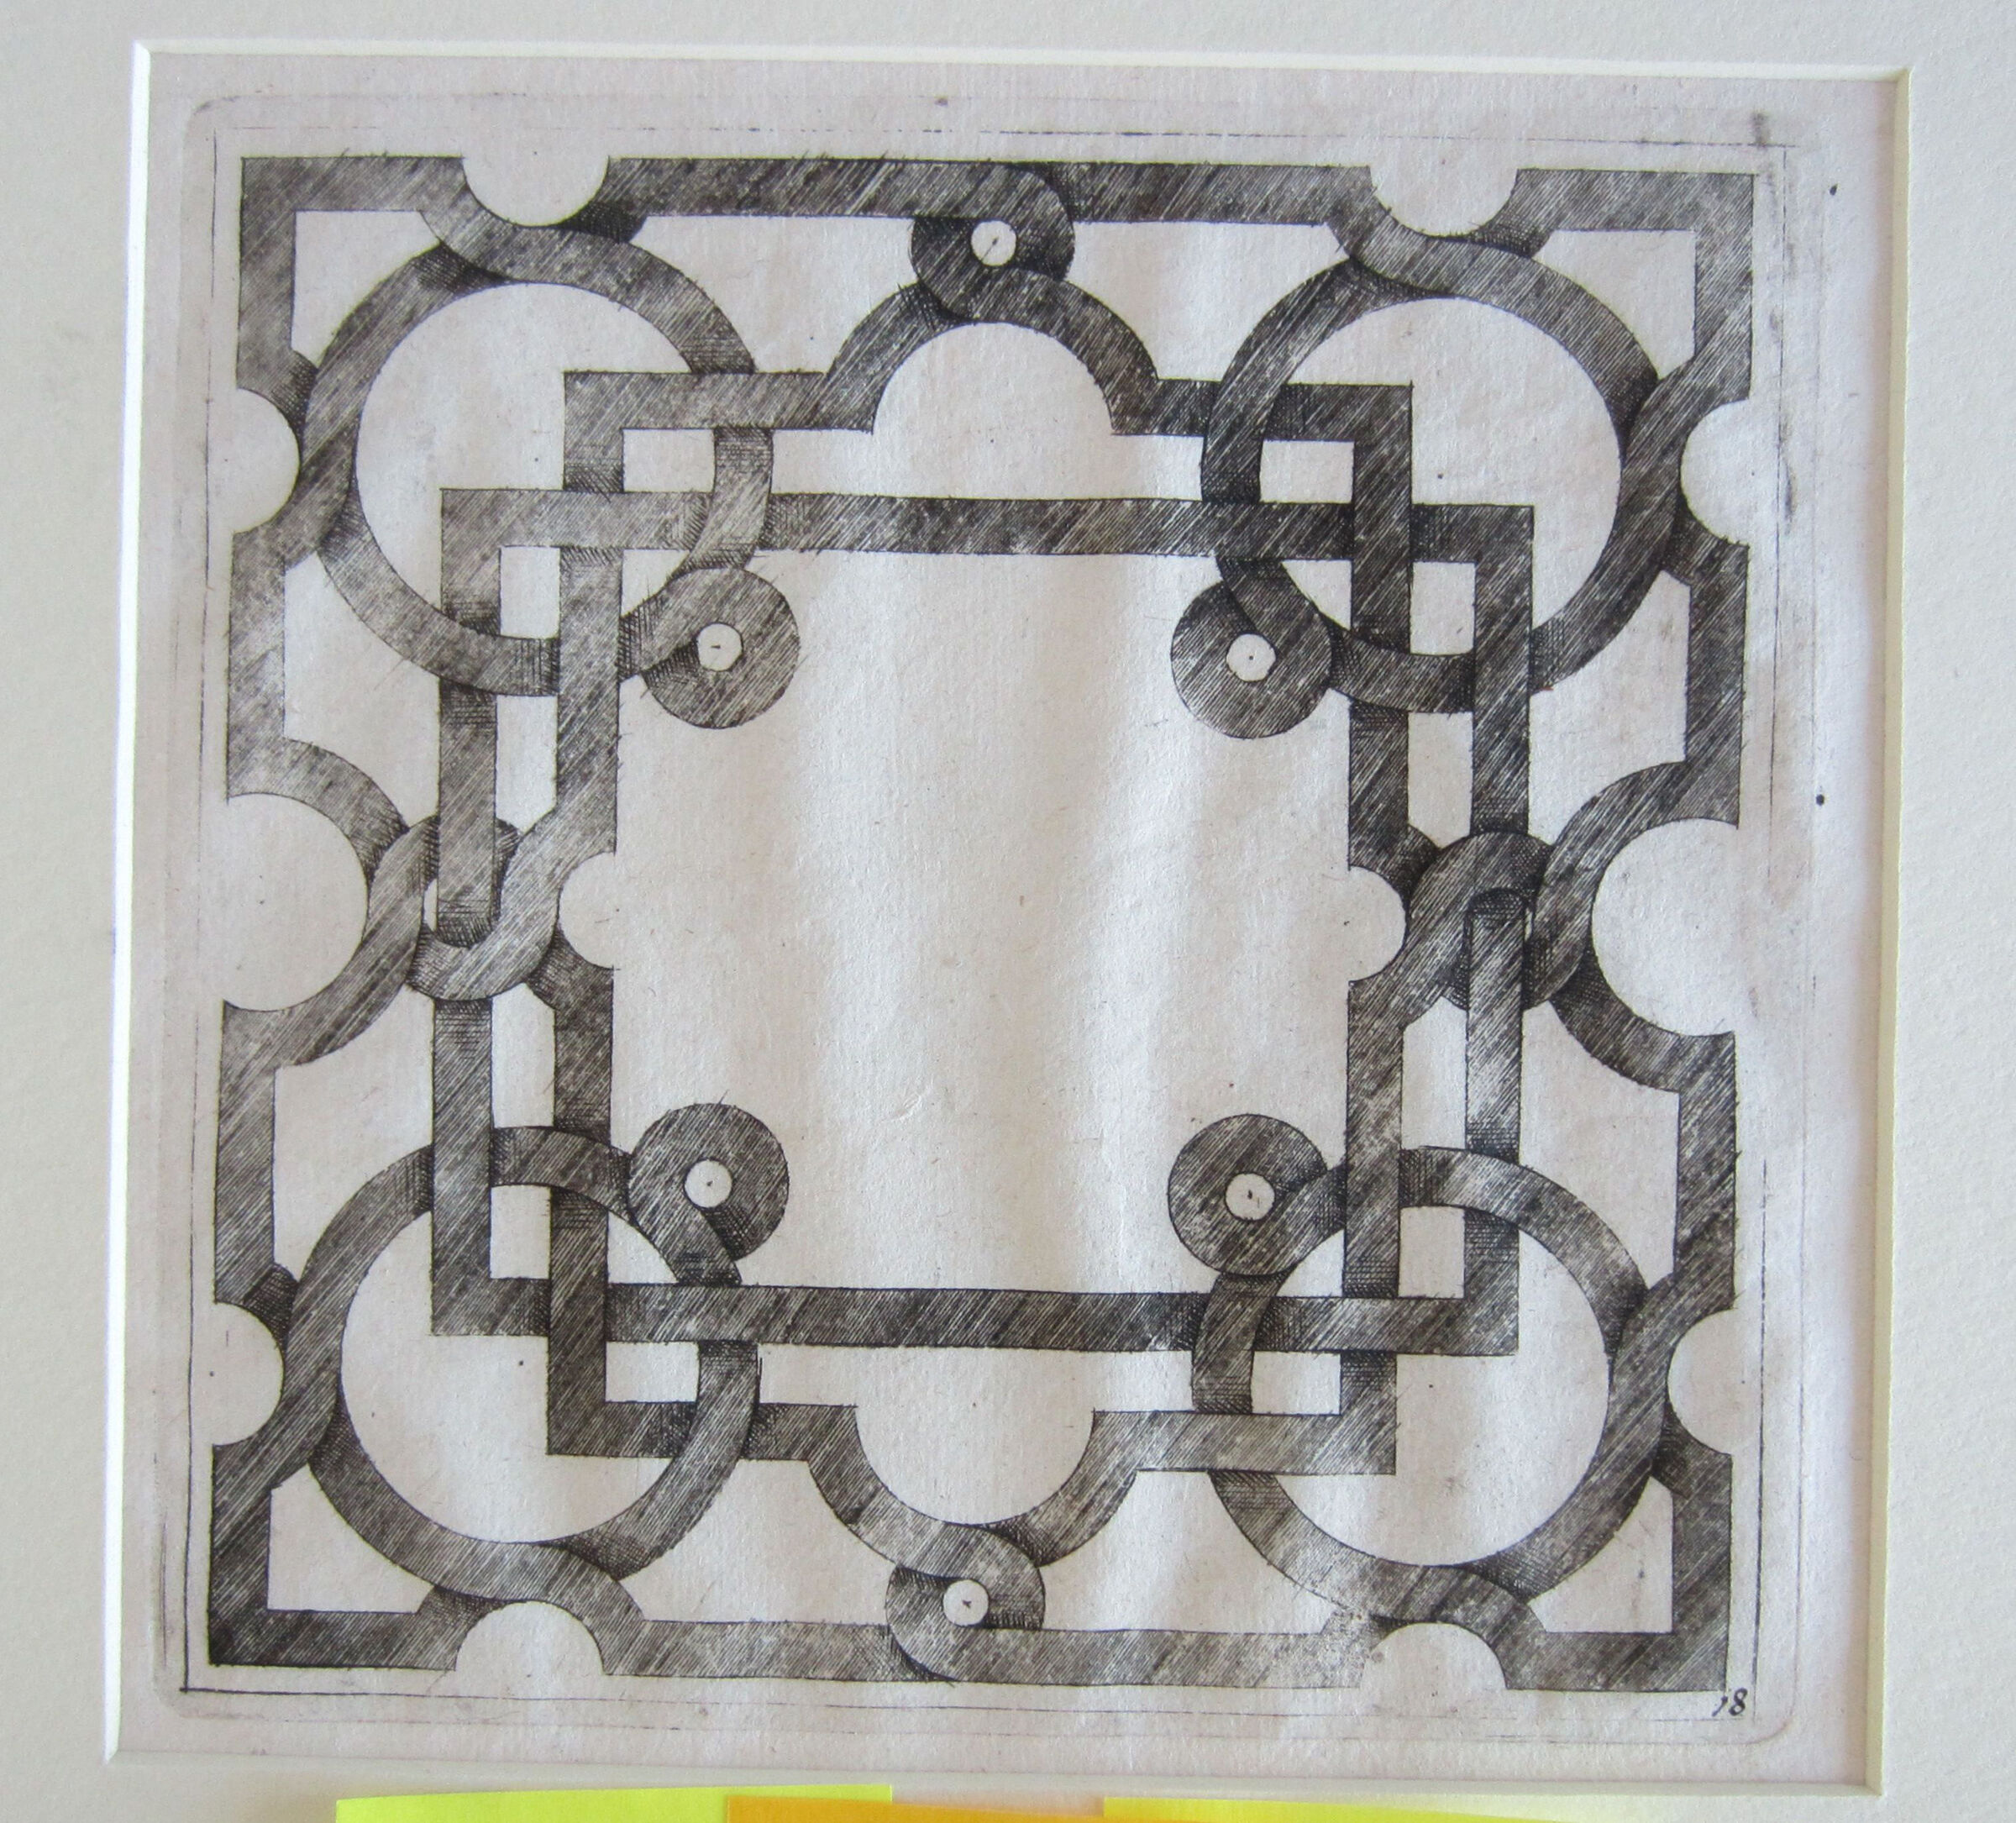 Interlace Centered By Two Rectangular Forms, One Without Linking Ornament